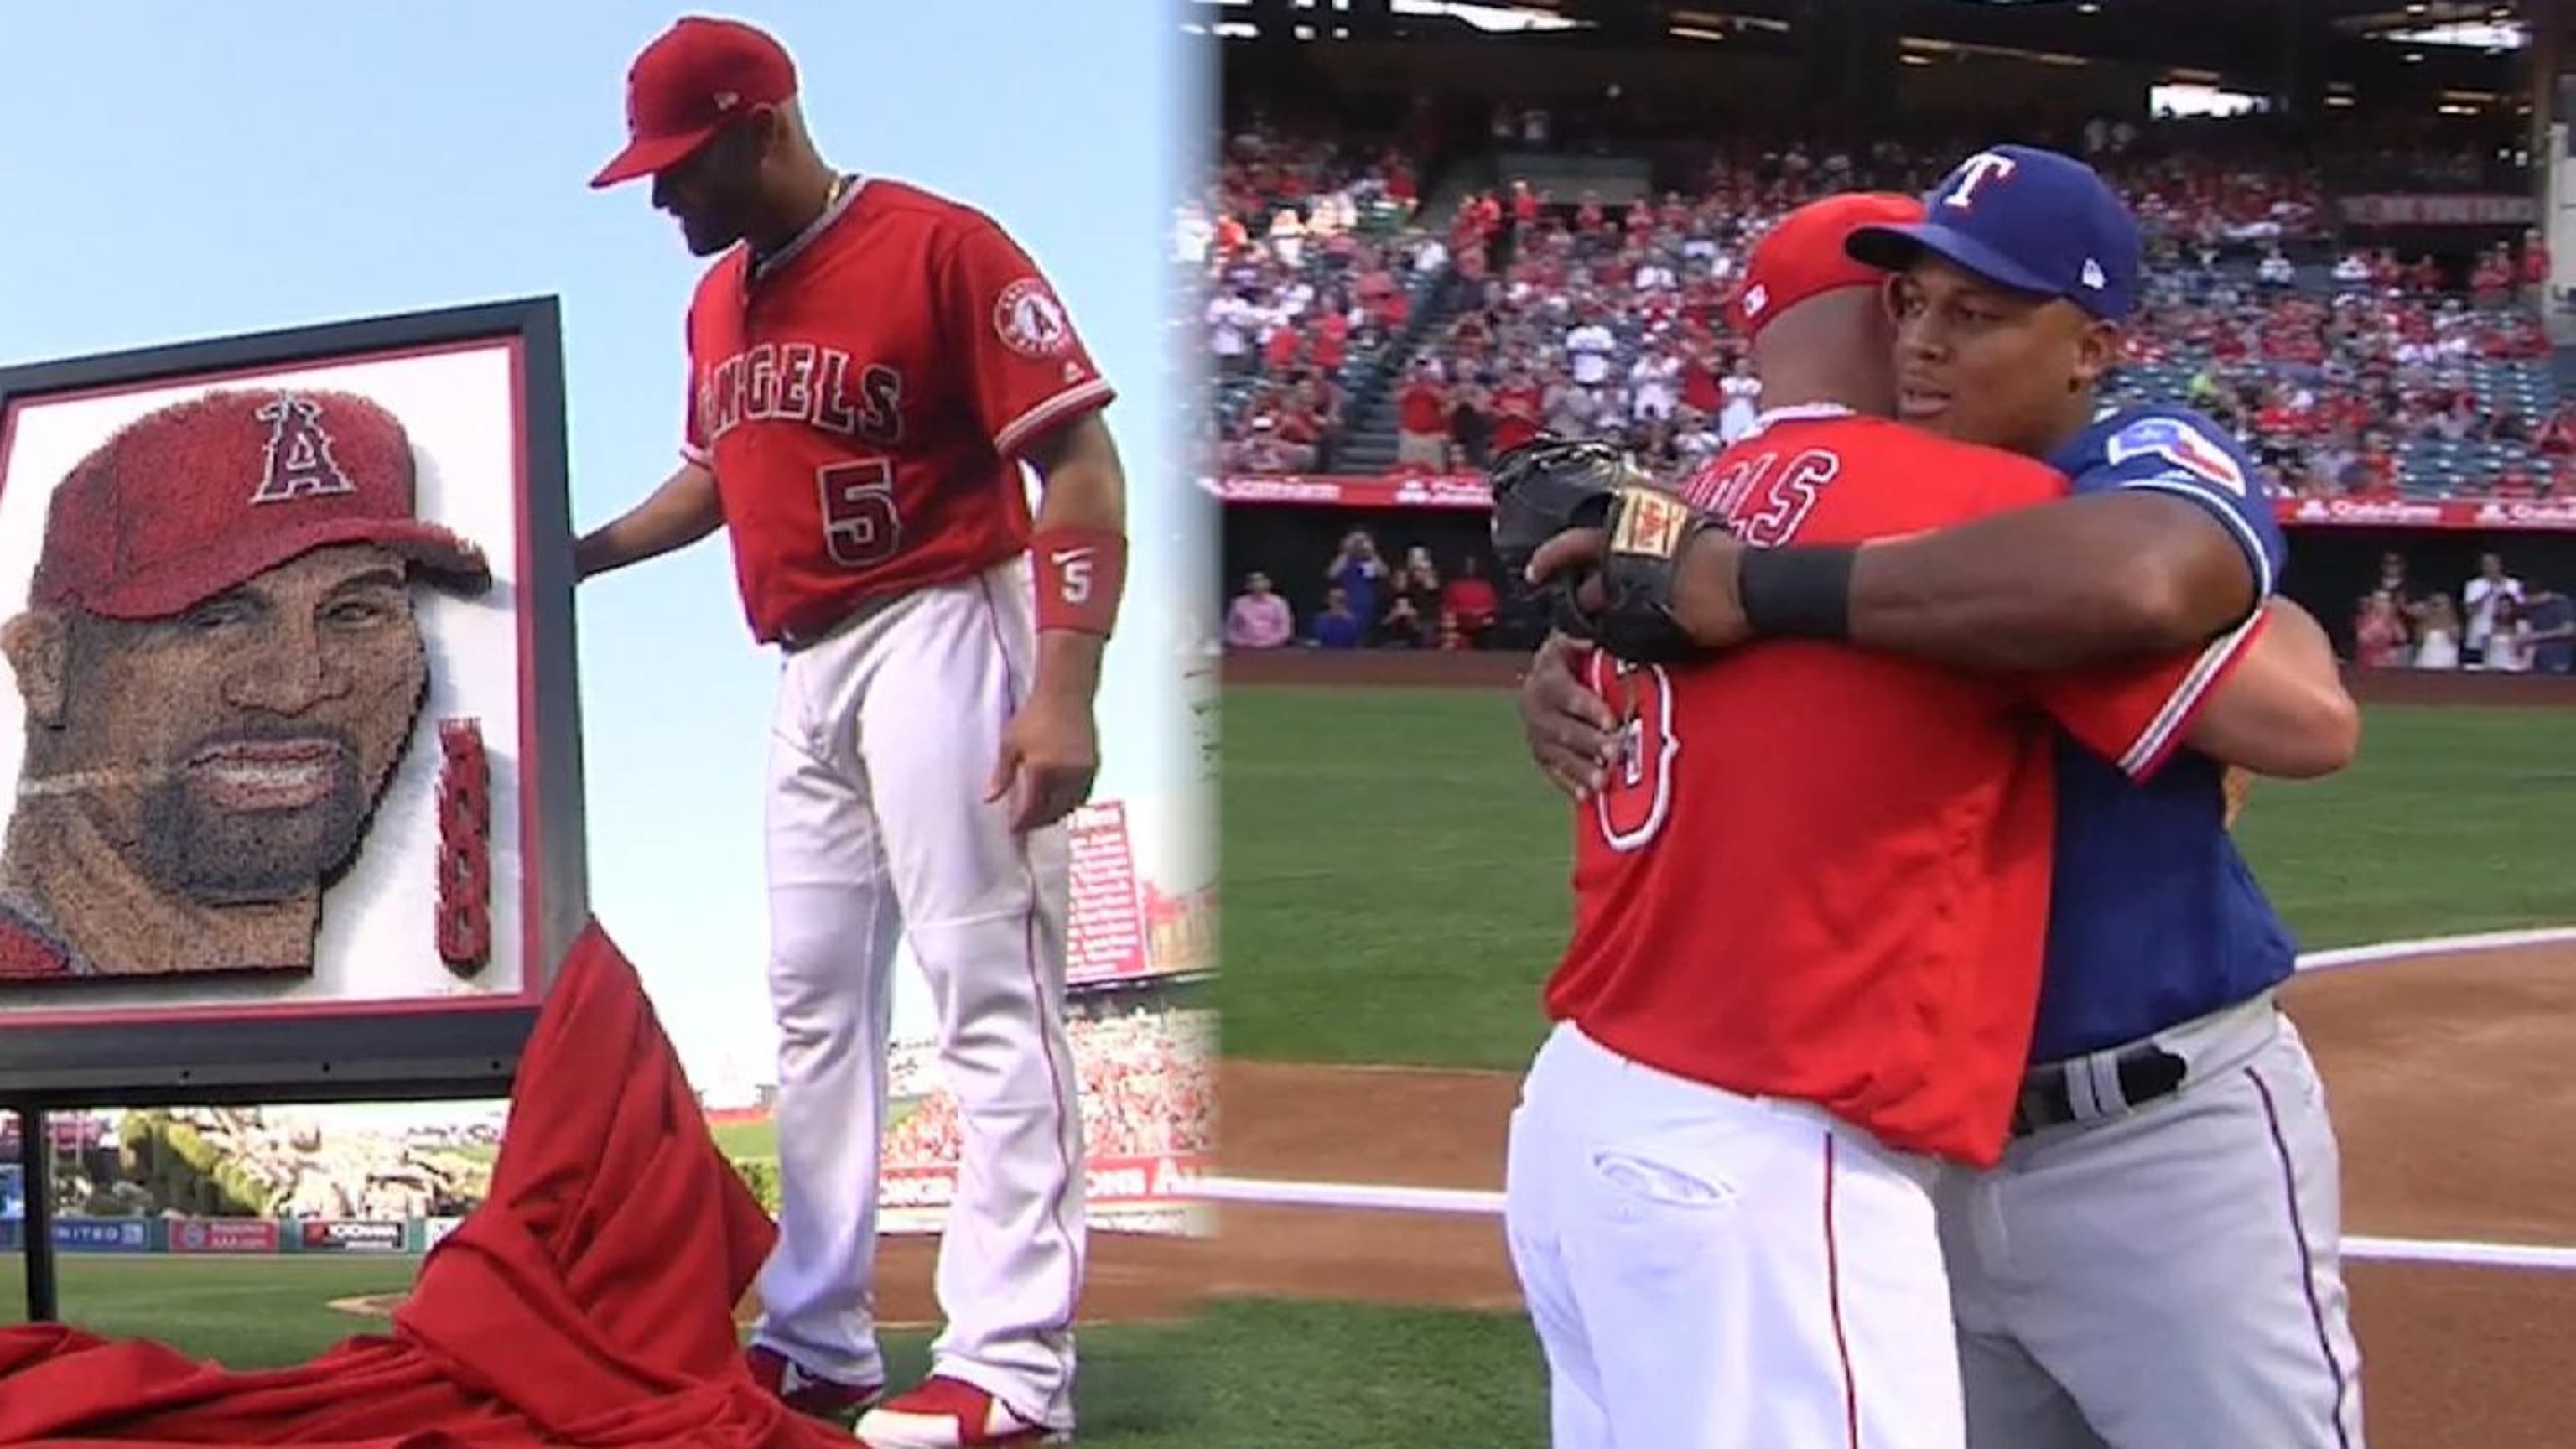 To celebrate reaching 3,000 hits, Albert Pujols threw out a first pitch to Adrian  Beltre